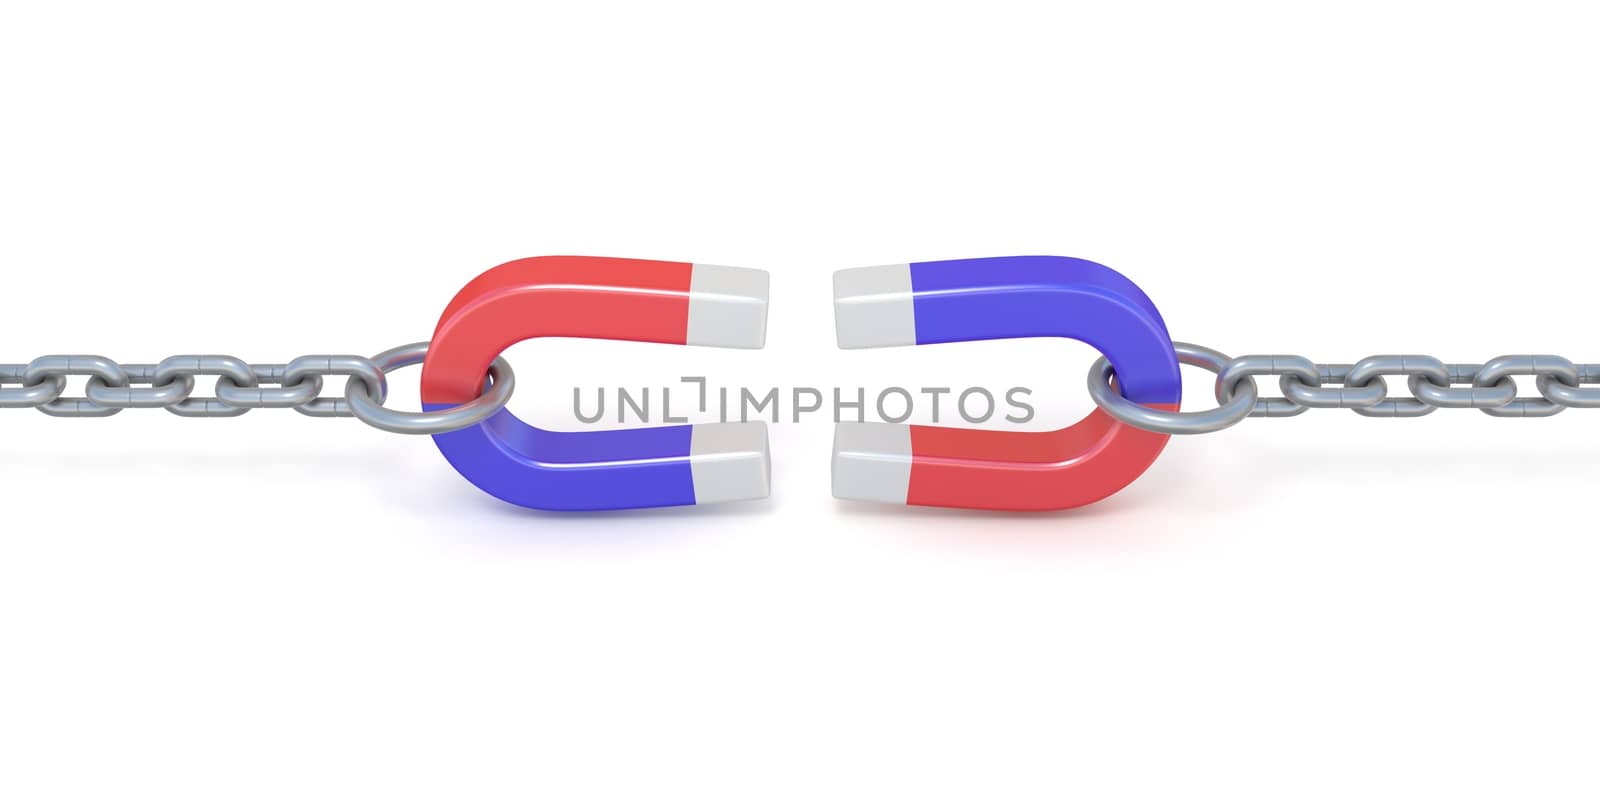 Two red and blue horseshoe magnet on chains 3D render illustration isolated on white background